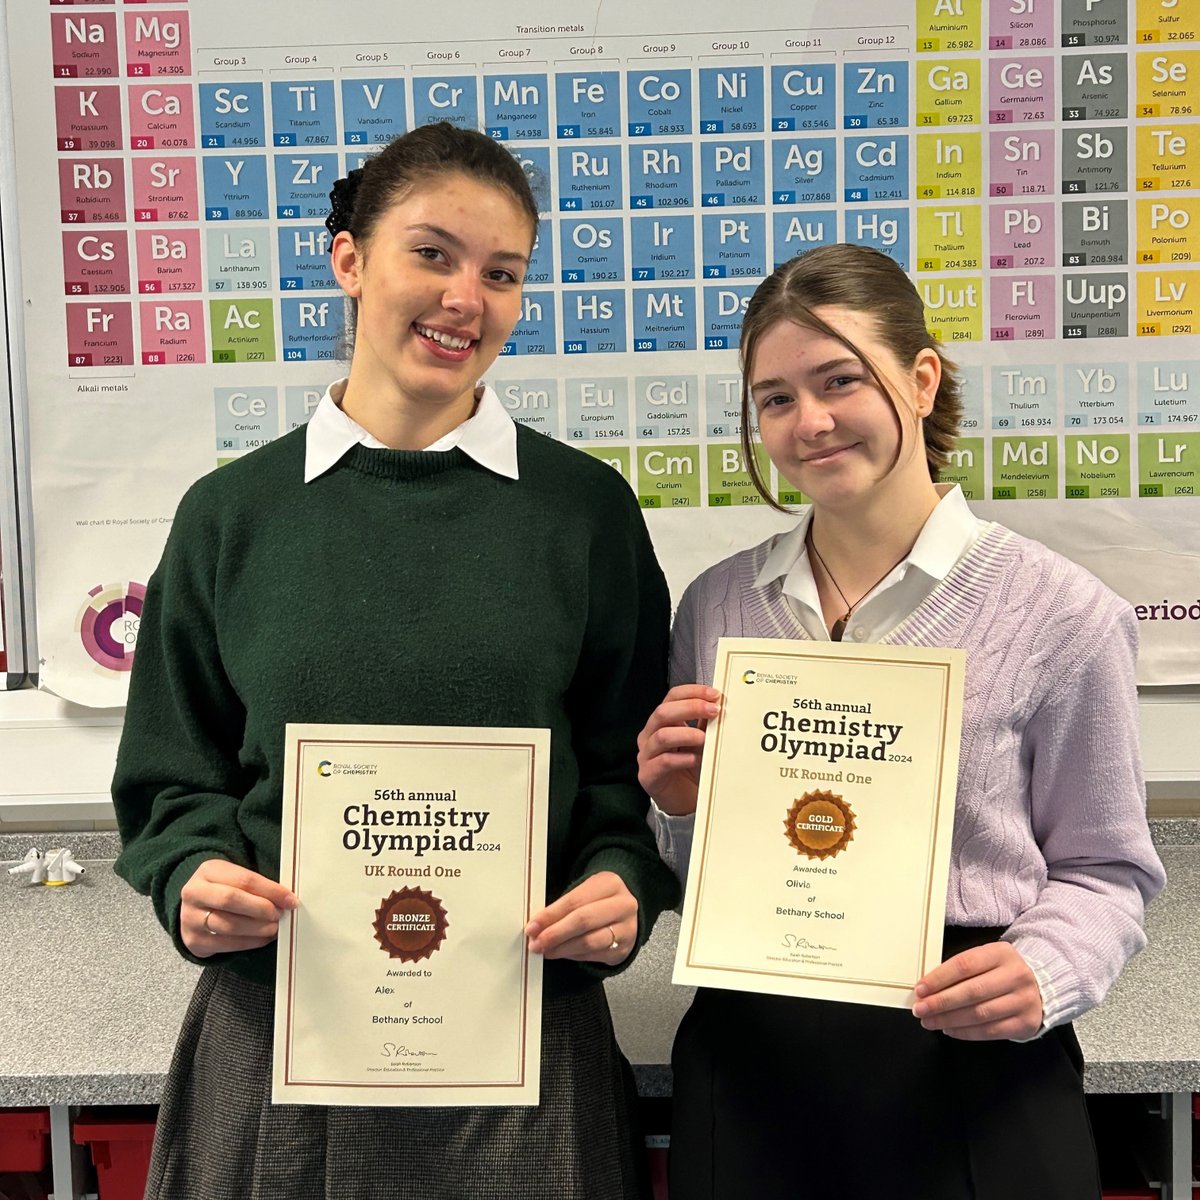 Chemistry Olympiad success! Alex has been awarded a Bronze Certificate and Lily achieved the highest possible award of a Gold Certificate. This marks Lily as one of the top 8.3% young chemists in the country! Full article 👉 hubs.la/Q02t7qV50 #bethanyschool #chemistry